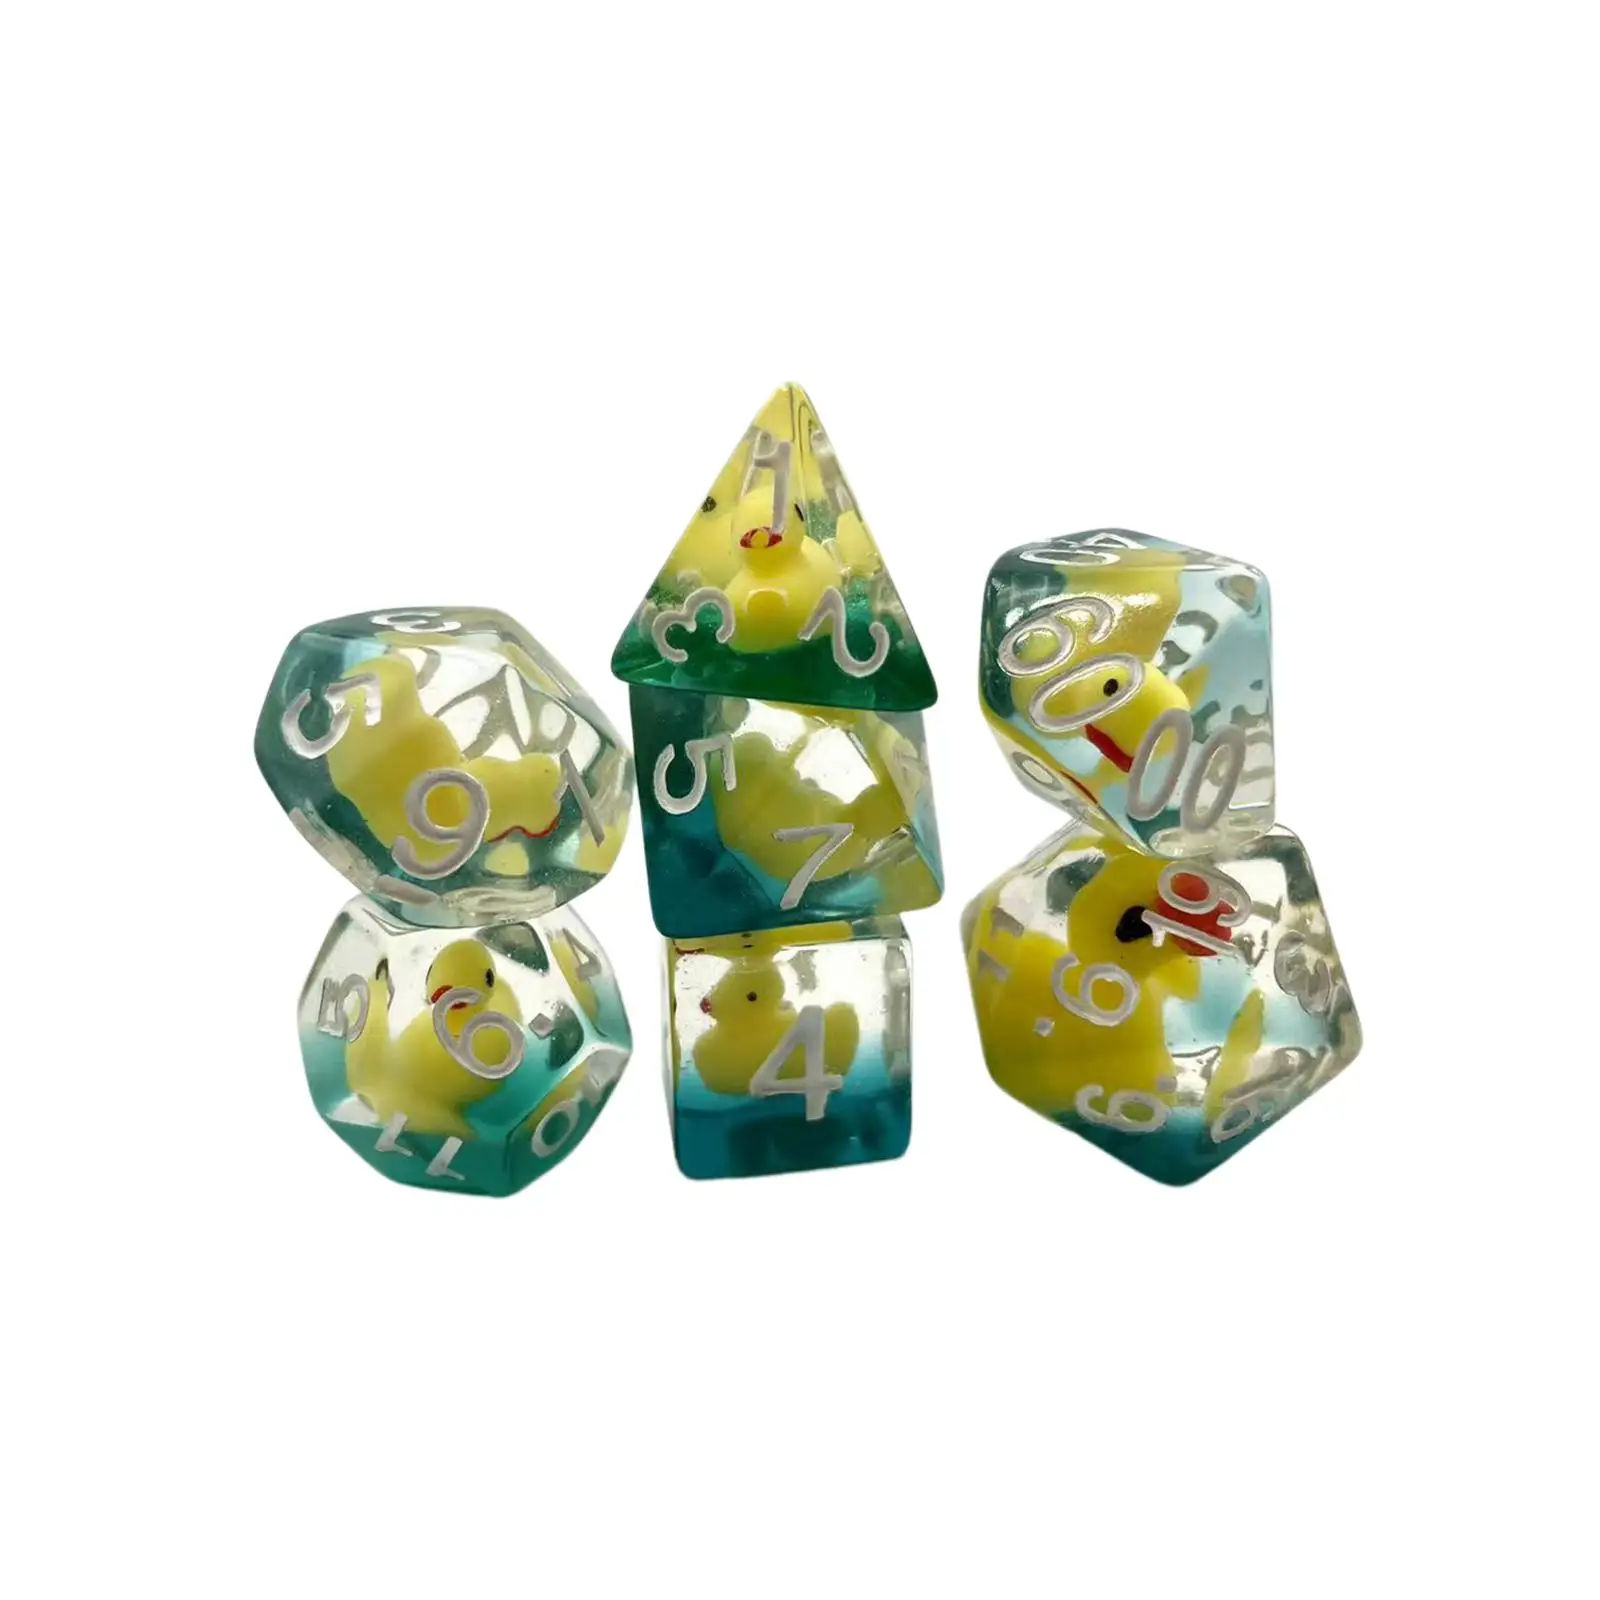 7x Multi Sided Polyhedral Dices Set Entertainment Toys D4-D20 Filled with Ducks for RPG Math Teaching Role Playing Board Game